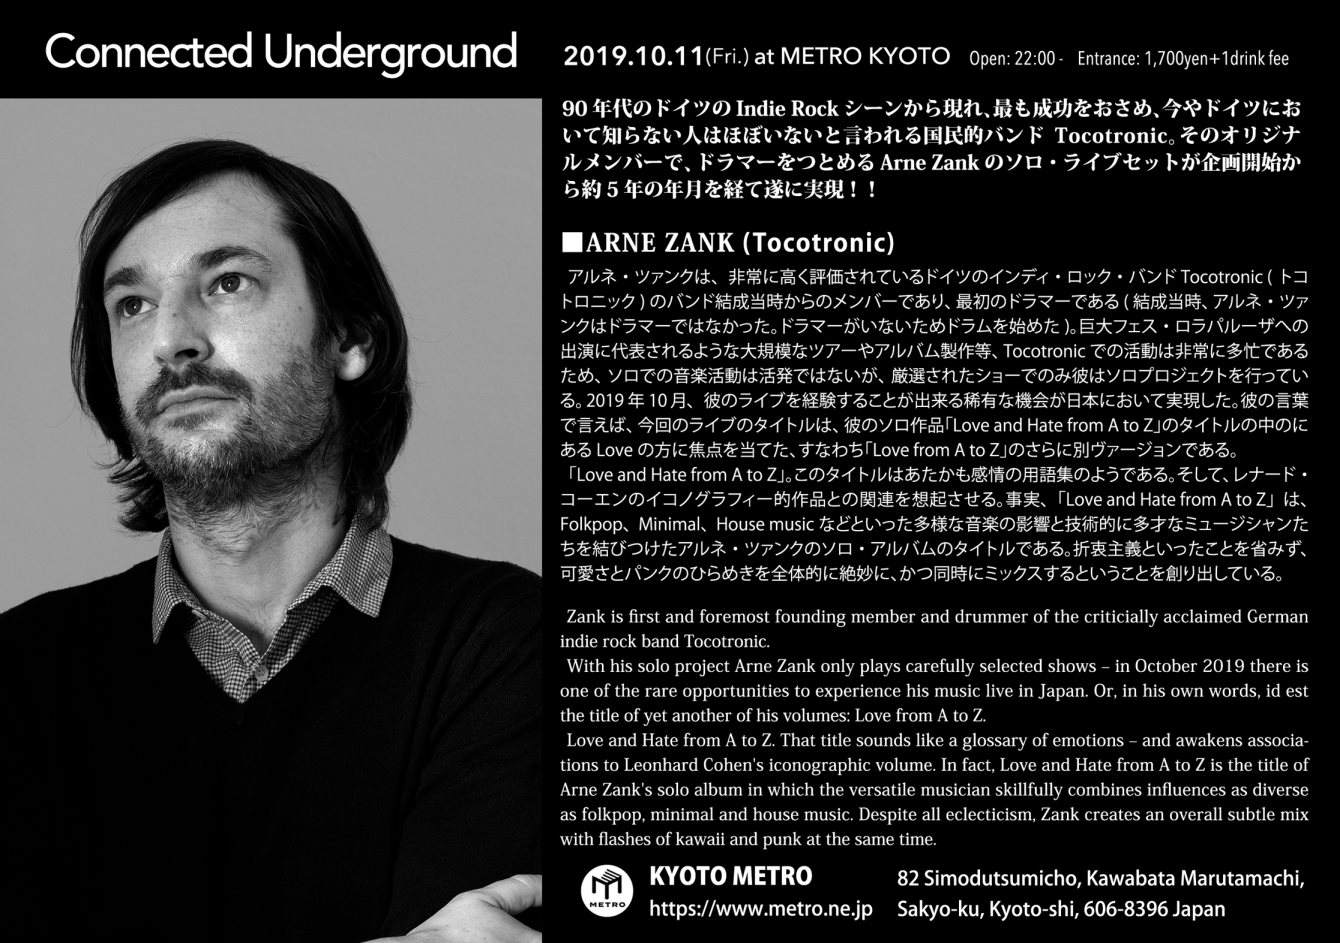 Connected Underground -Arne Zank (Tocotronic) Special Solo Live Set 'Love From A to Z' in Kyoto - Página trasera